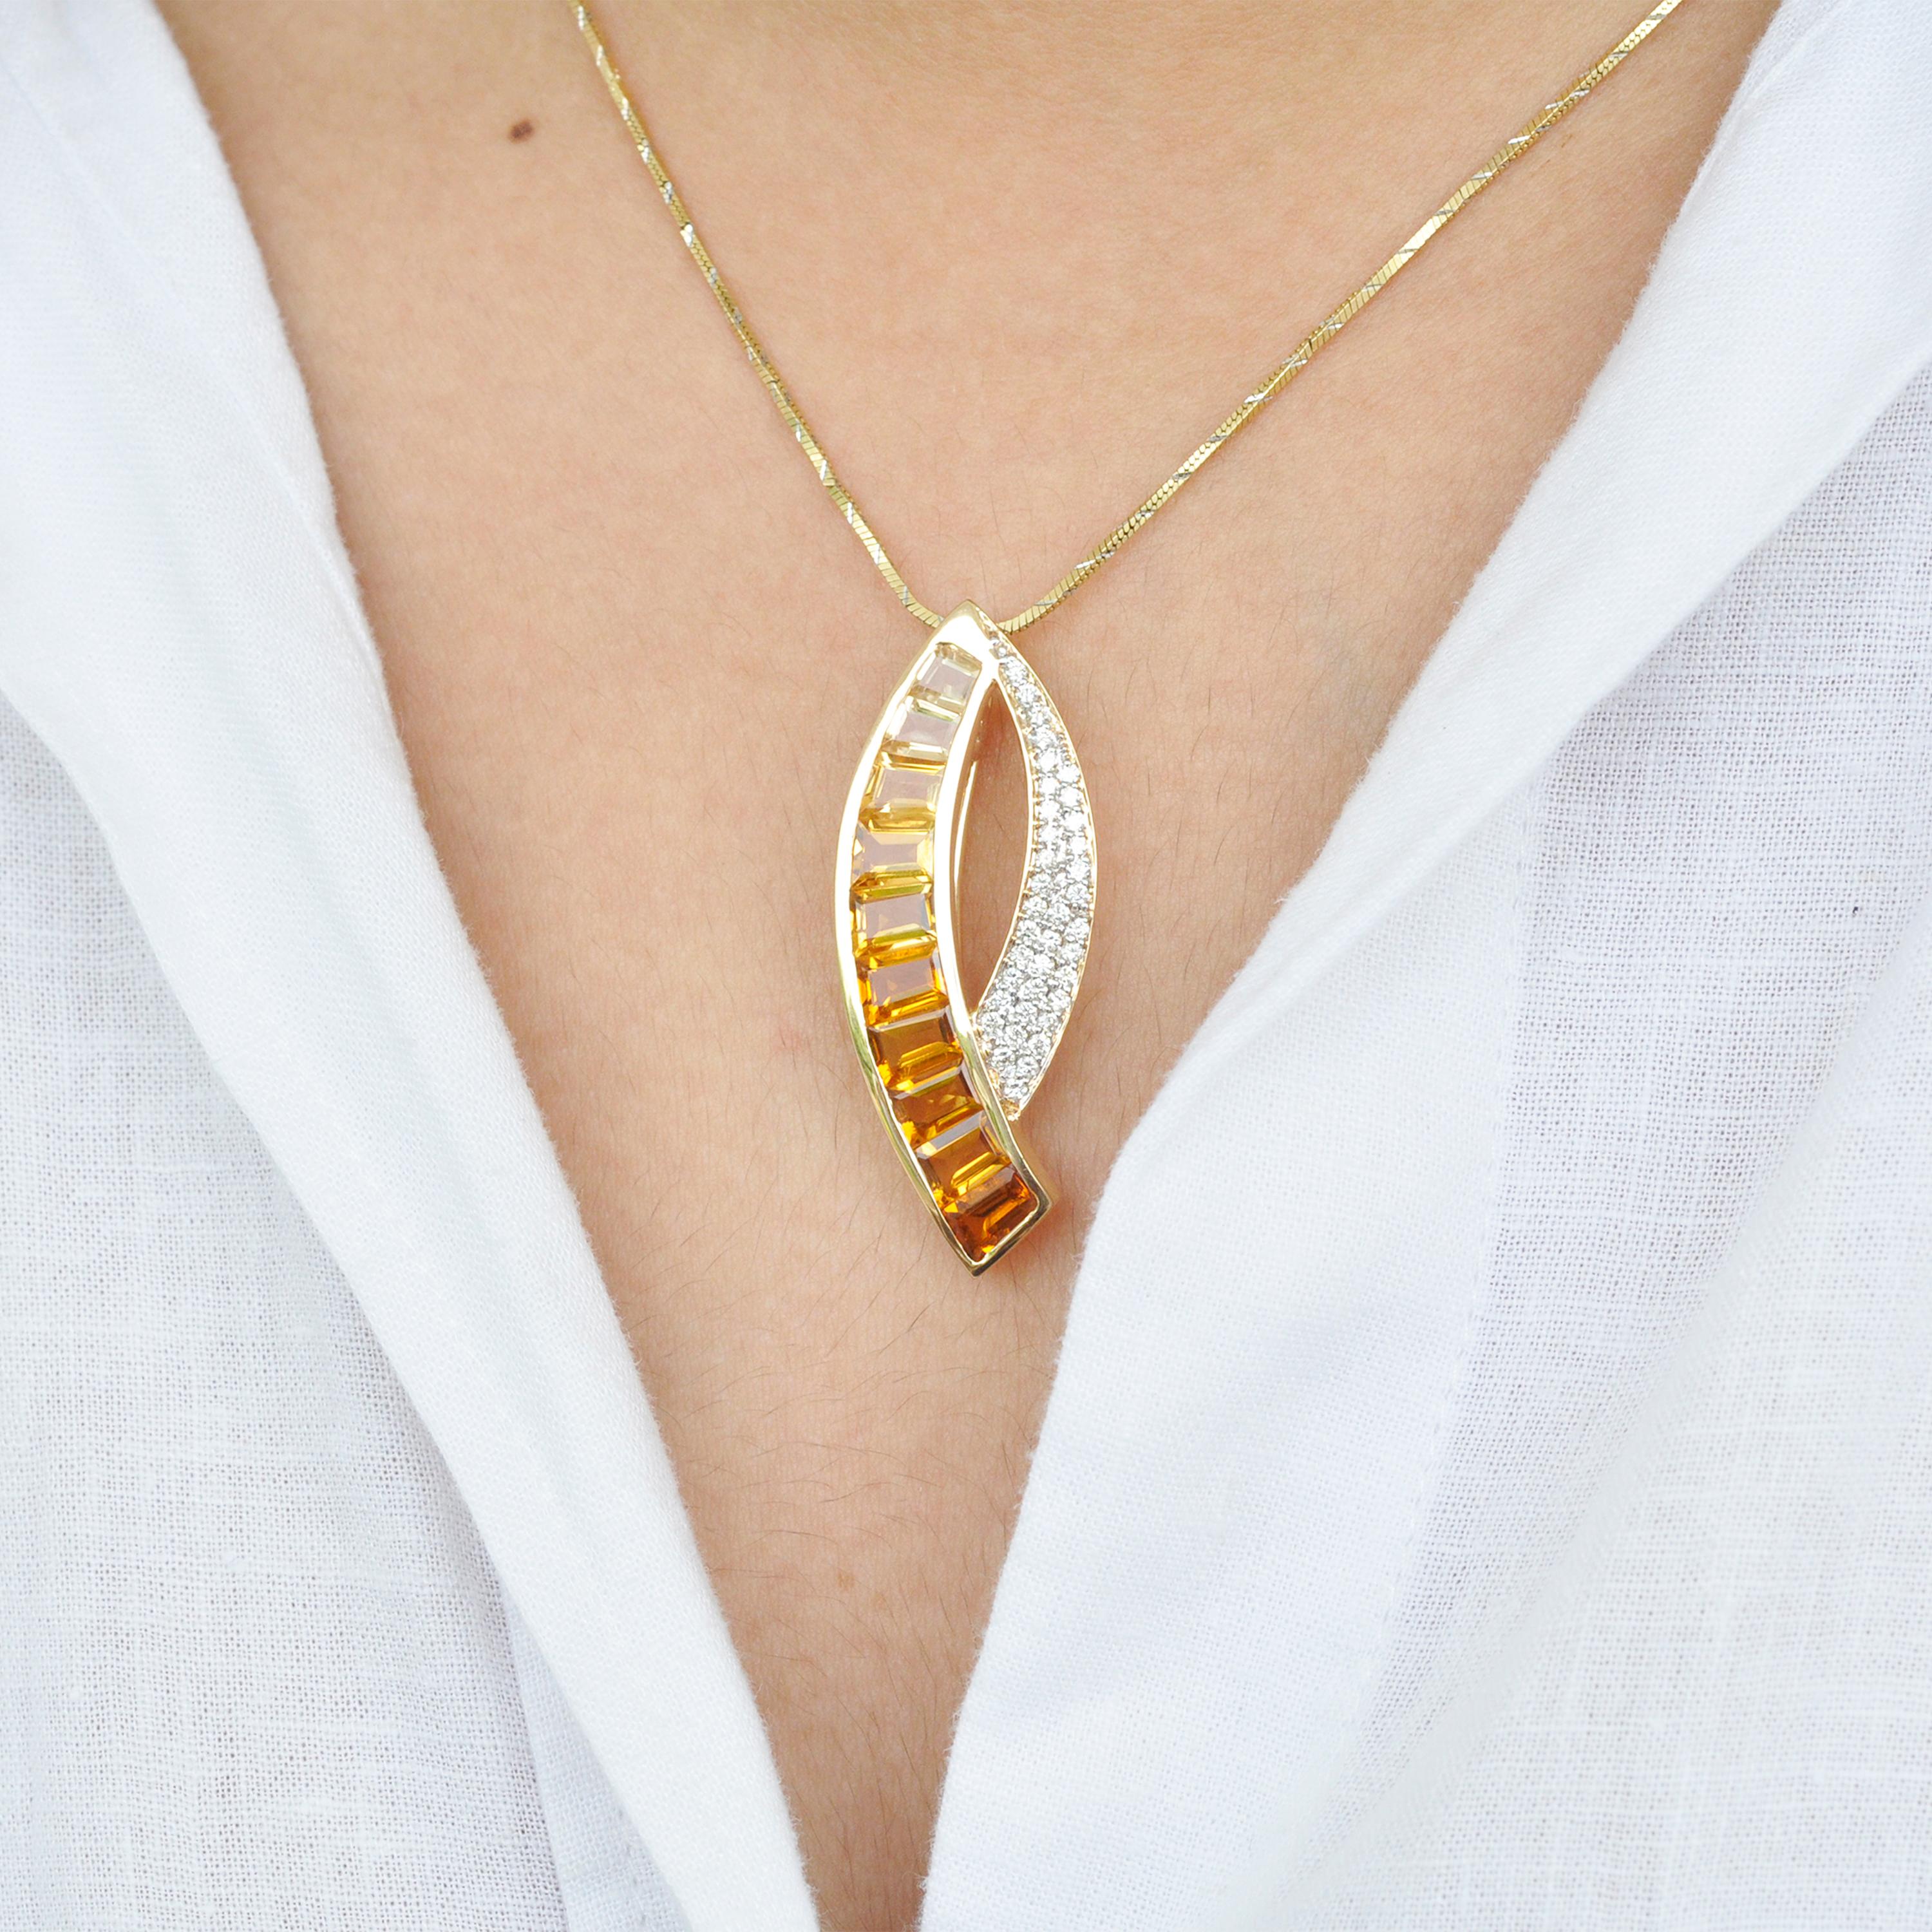 18 karat gold custom cut gradient taper baguette citrine diamond pendant brooch.

This glorious yellow citrine pendant brooch depicts an exemplary play of shades of lustrous citrines. The shape of this extraordinary pendant brooch has an